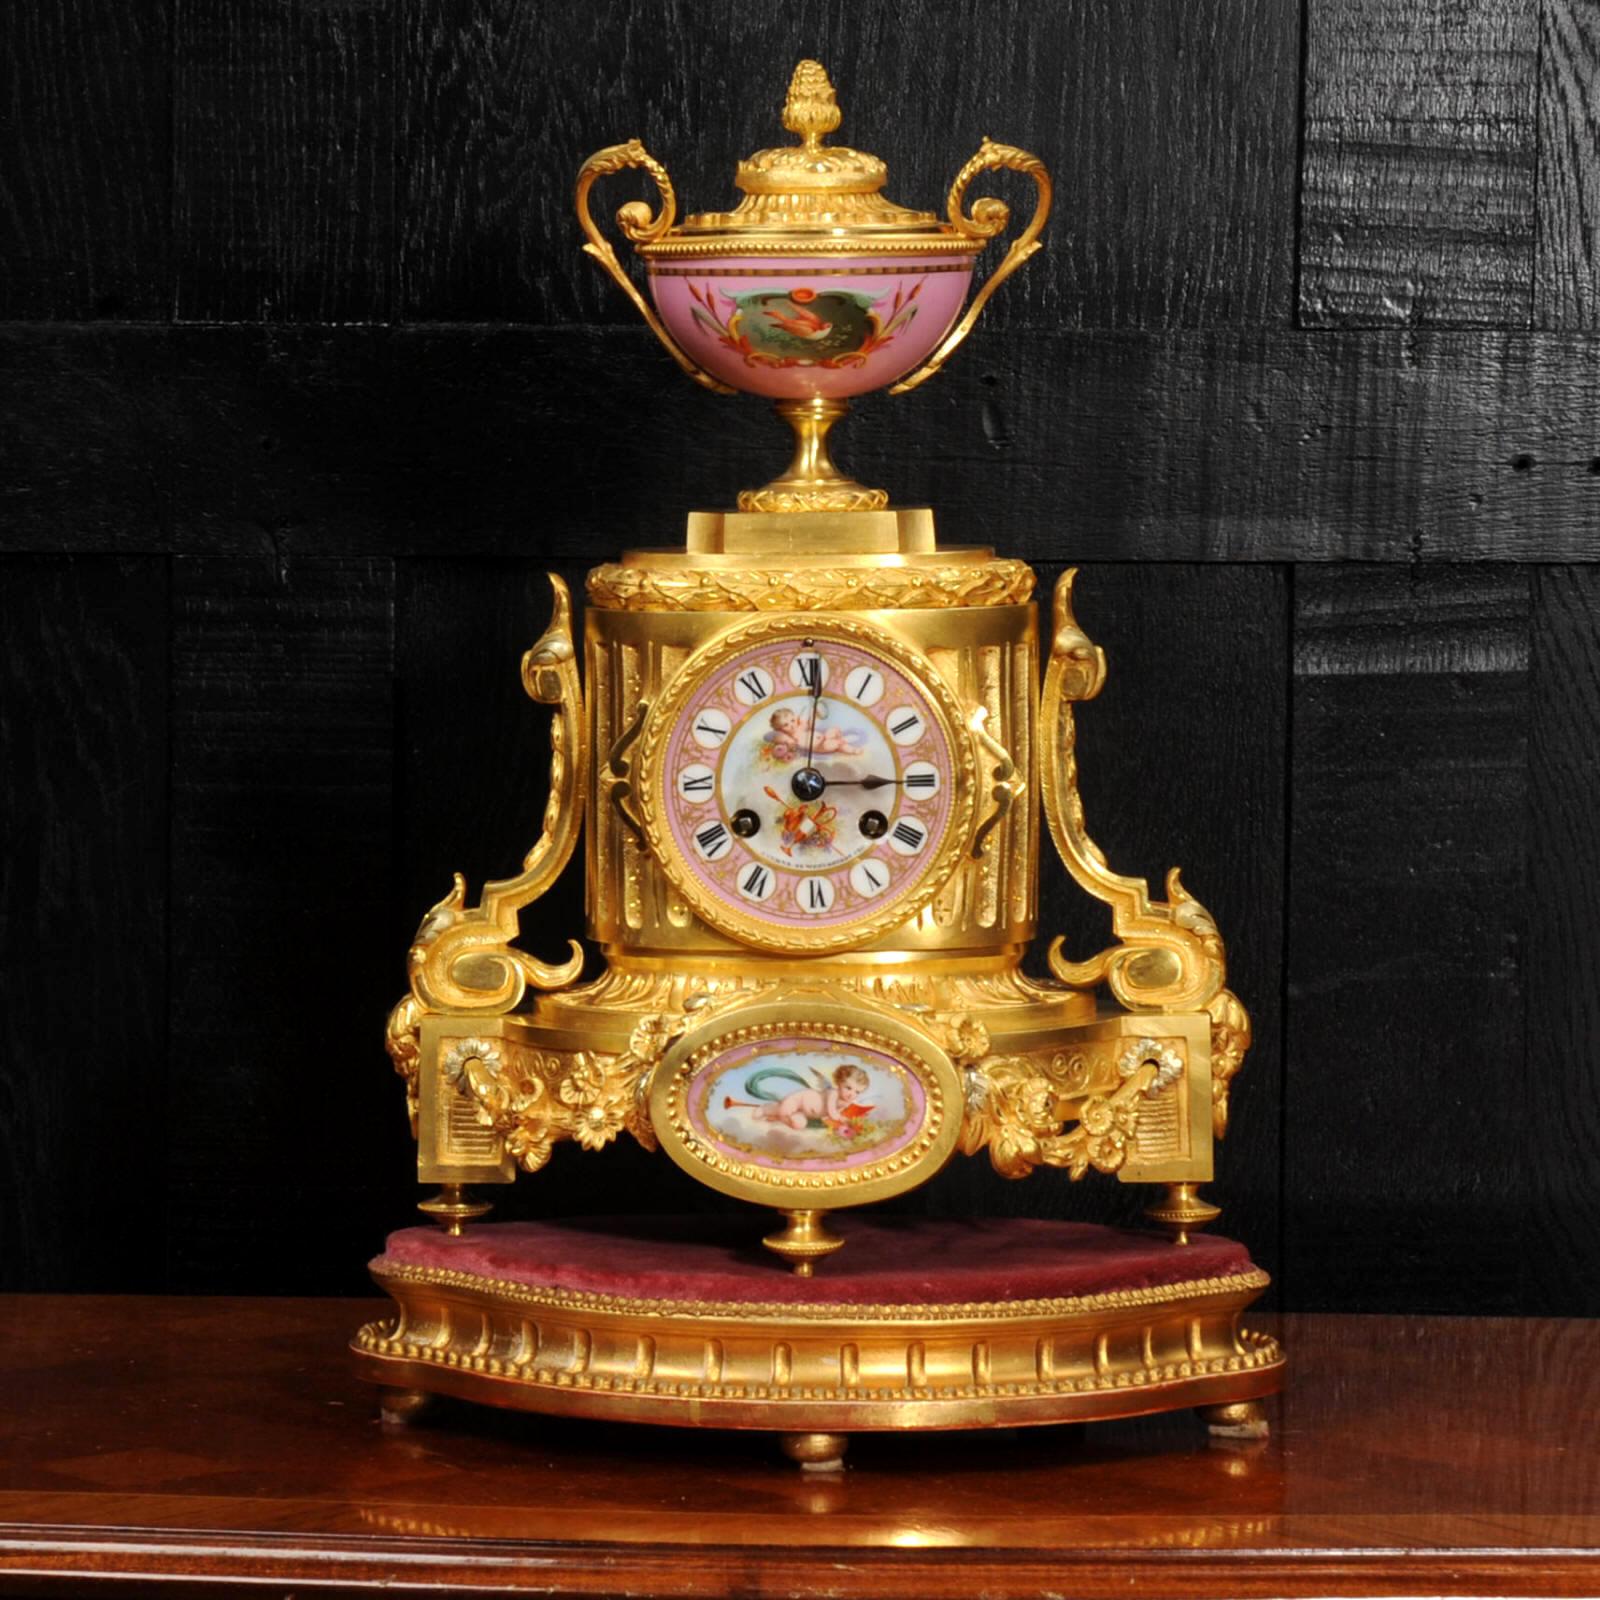 Louis XVI Ormolu and Sevres Porcelain Antique French Clock by Achille Brocot For Sale